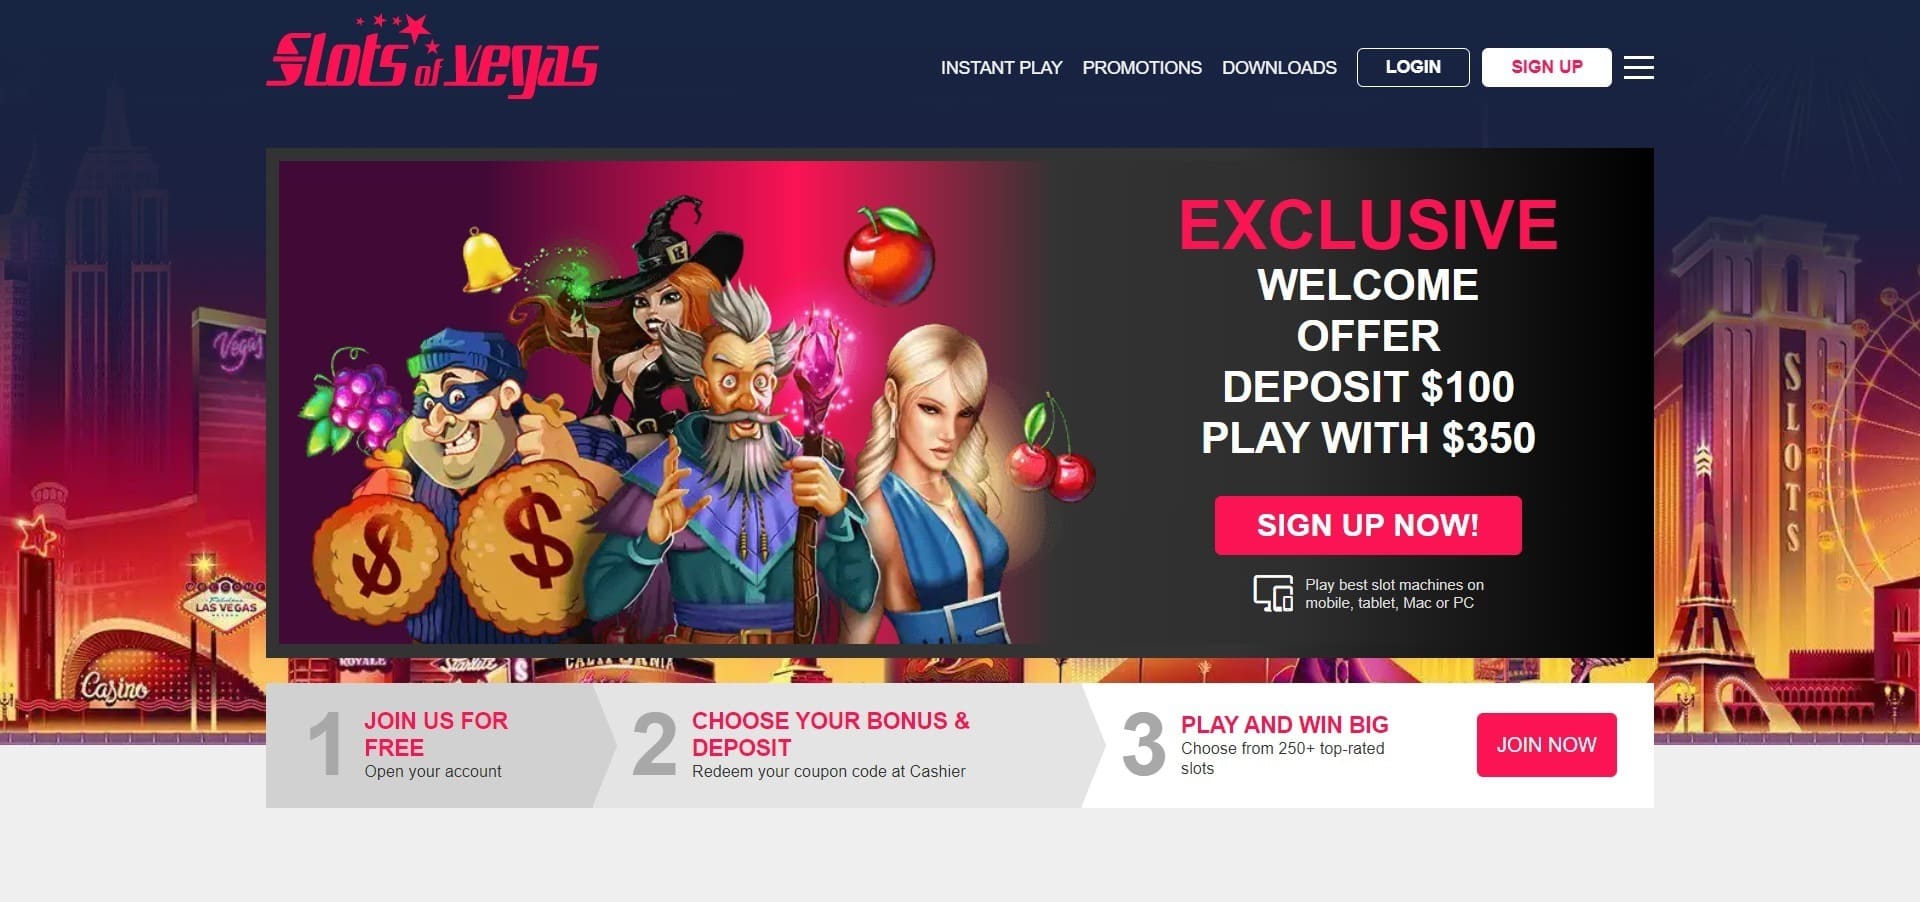 Official website of the Slots of Vegas Casino